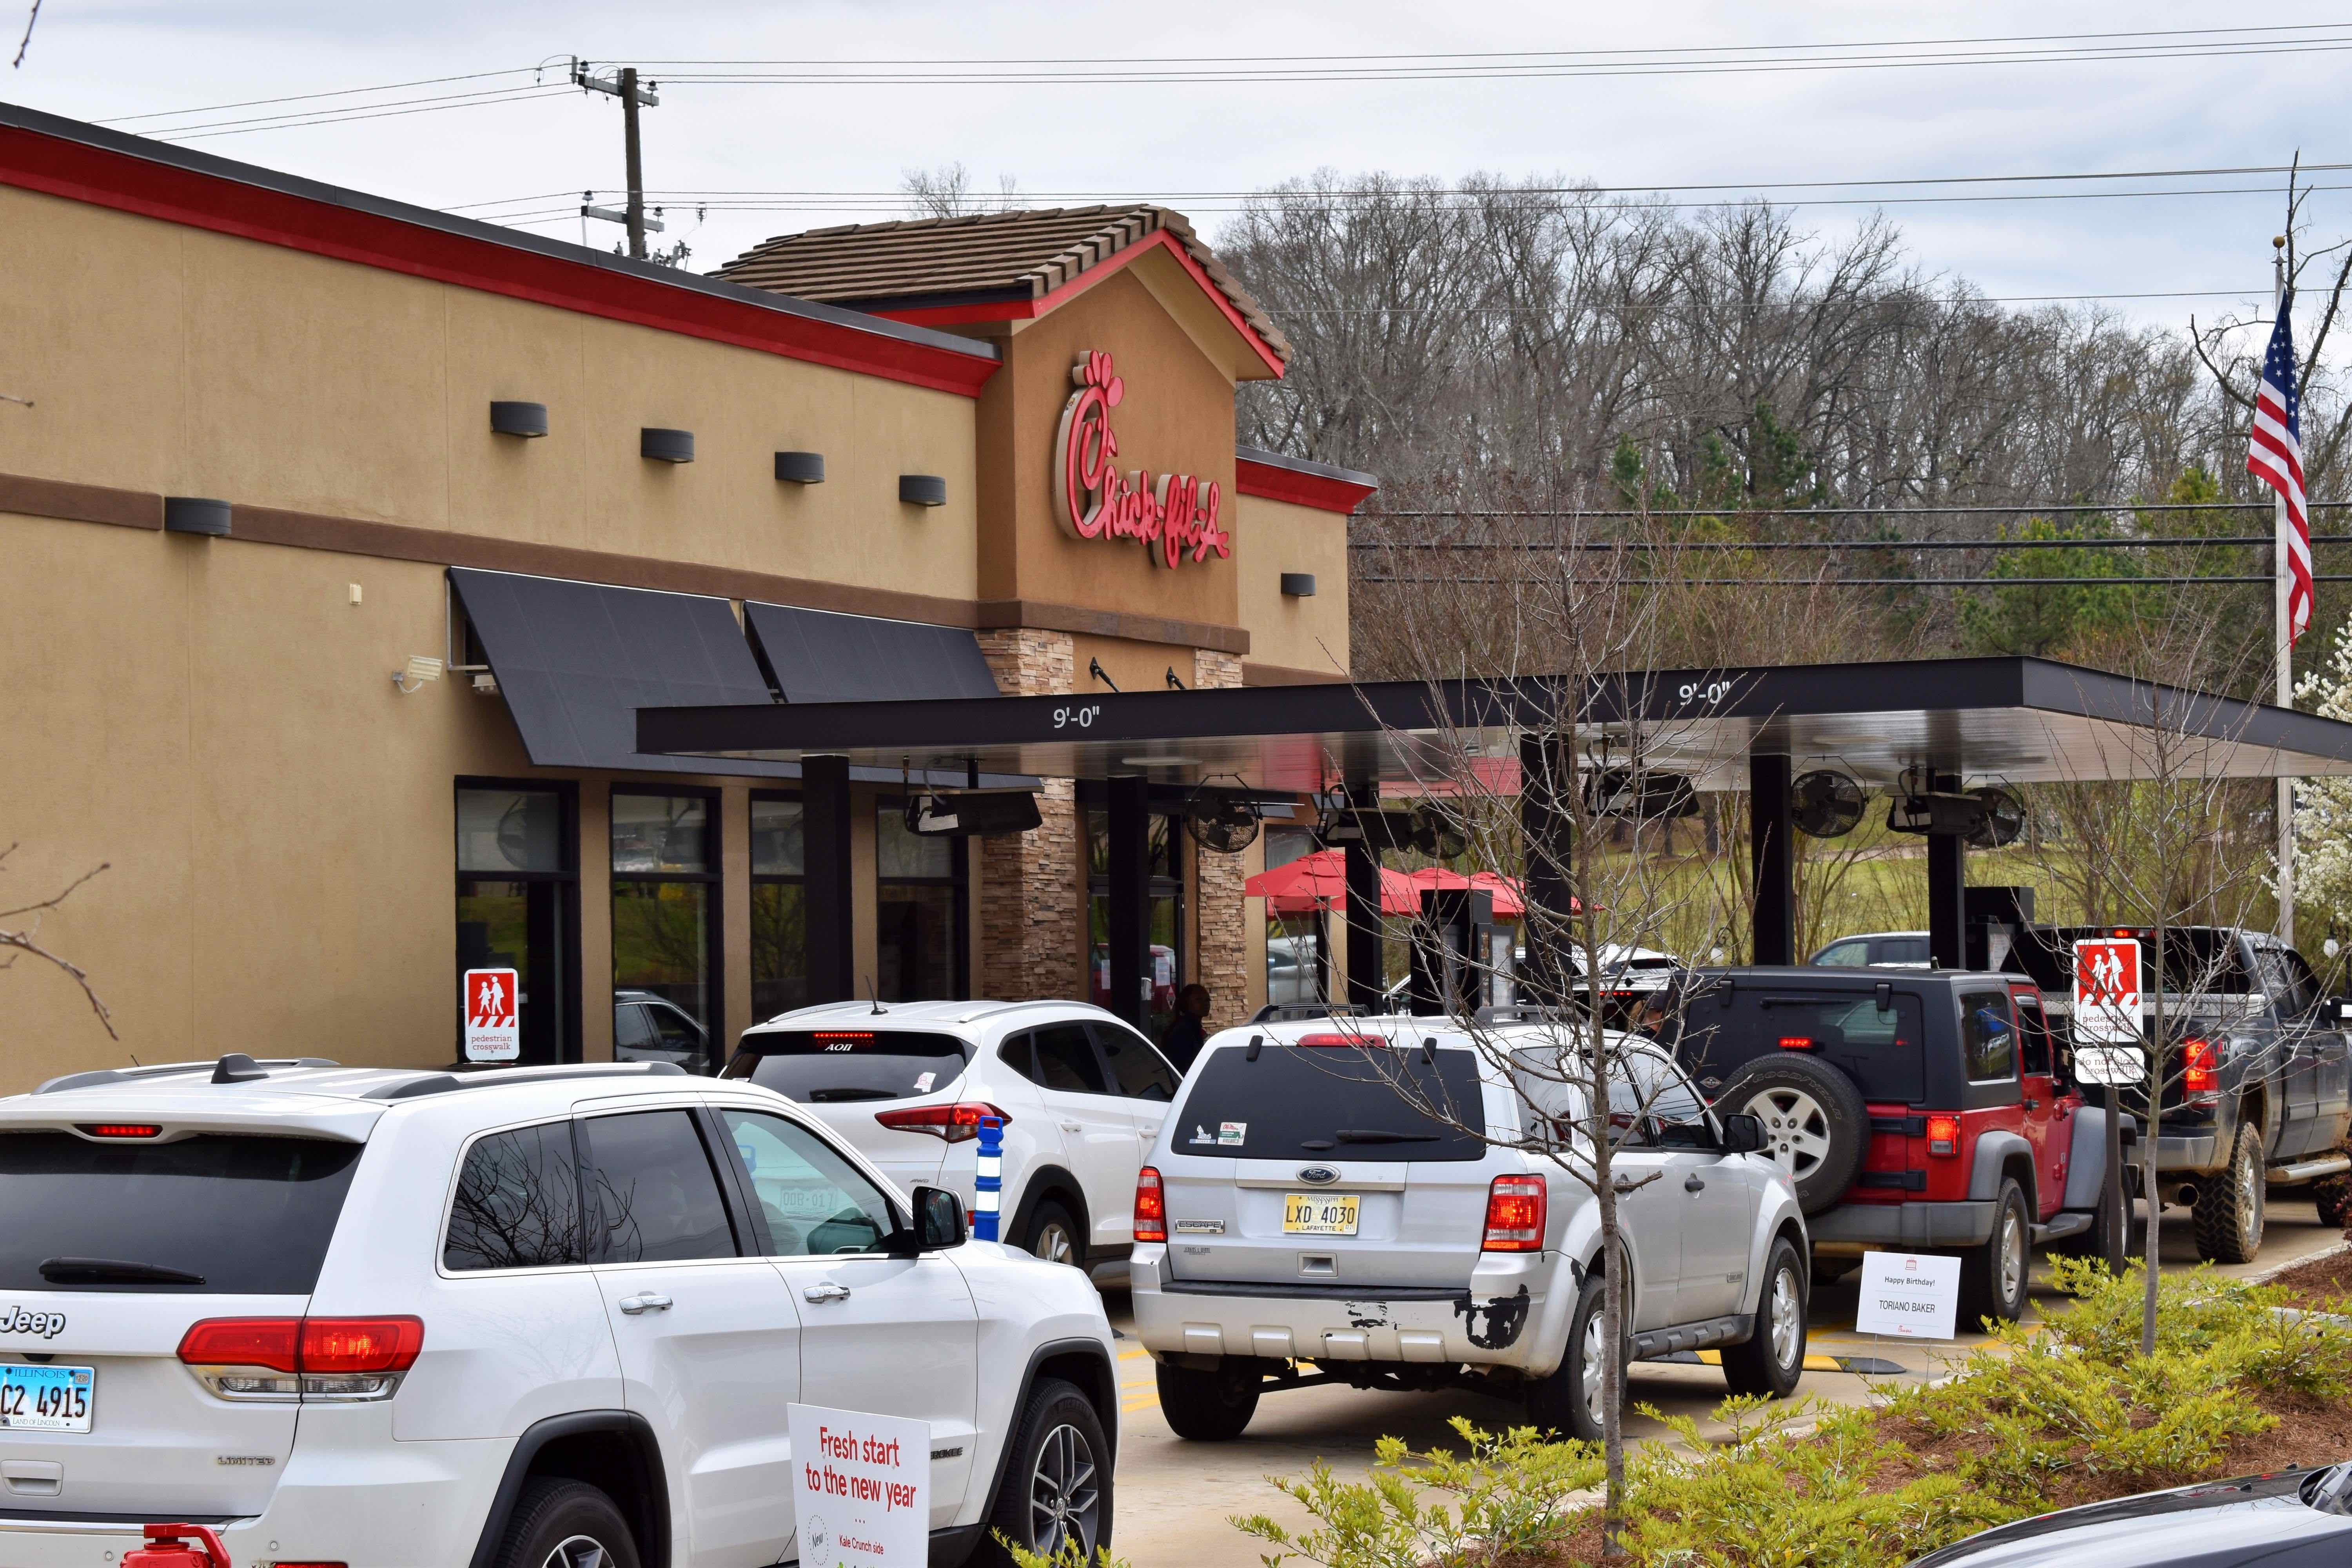 ChickfilA to close for 10 weeks due to extensive renovations The